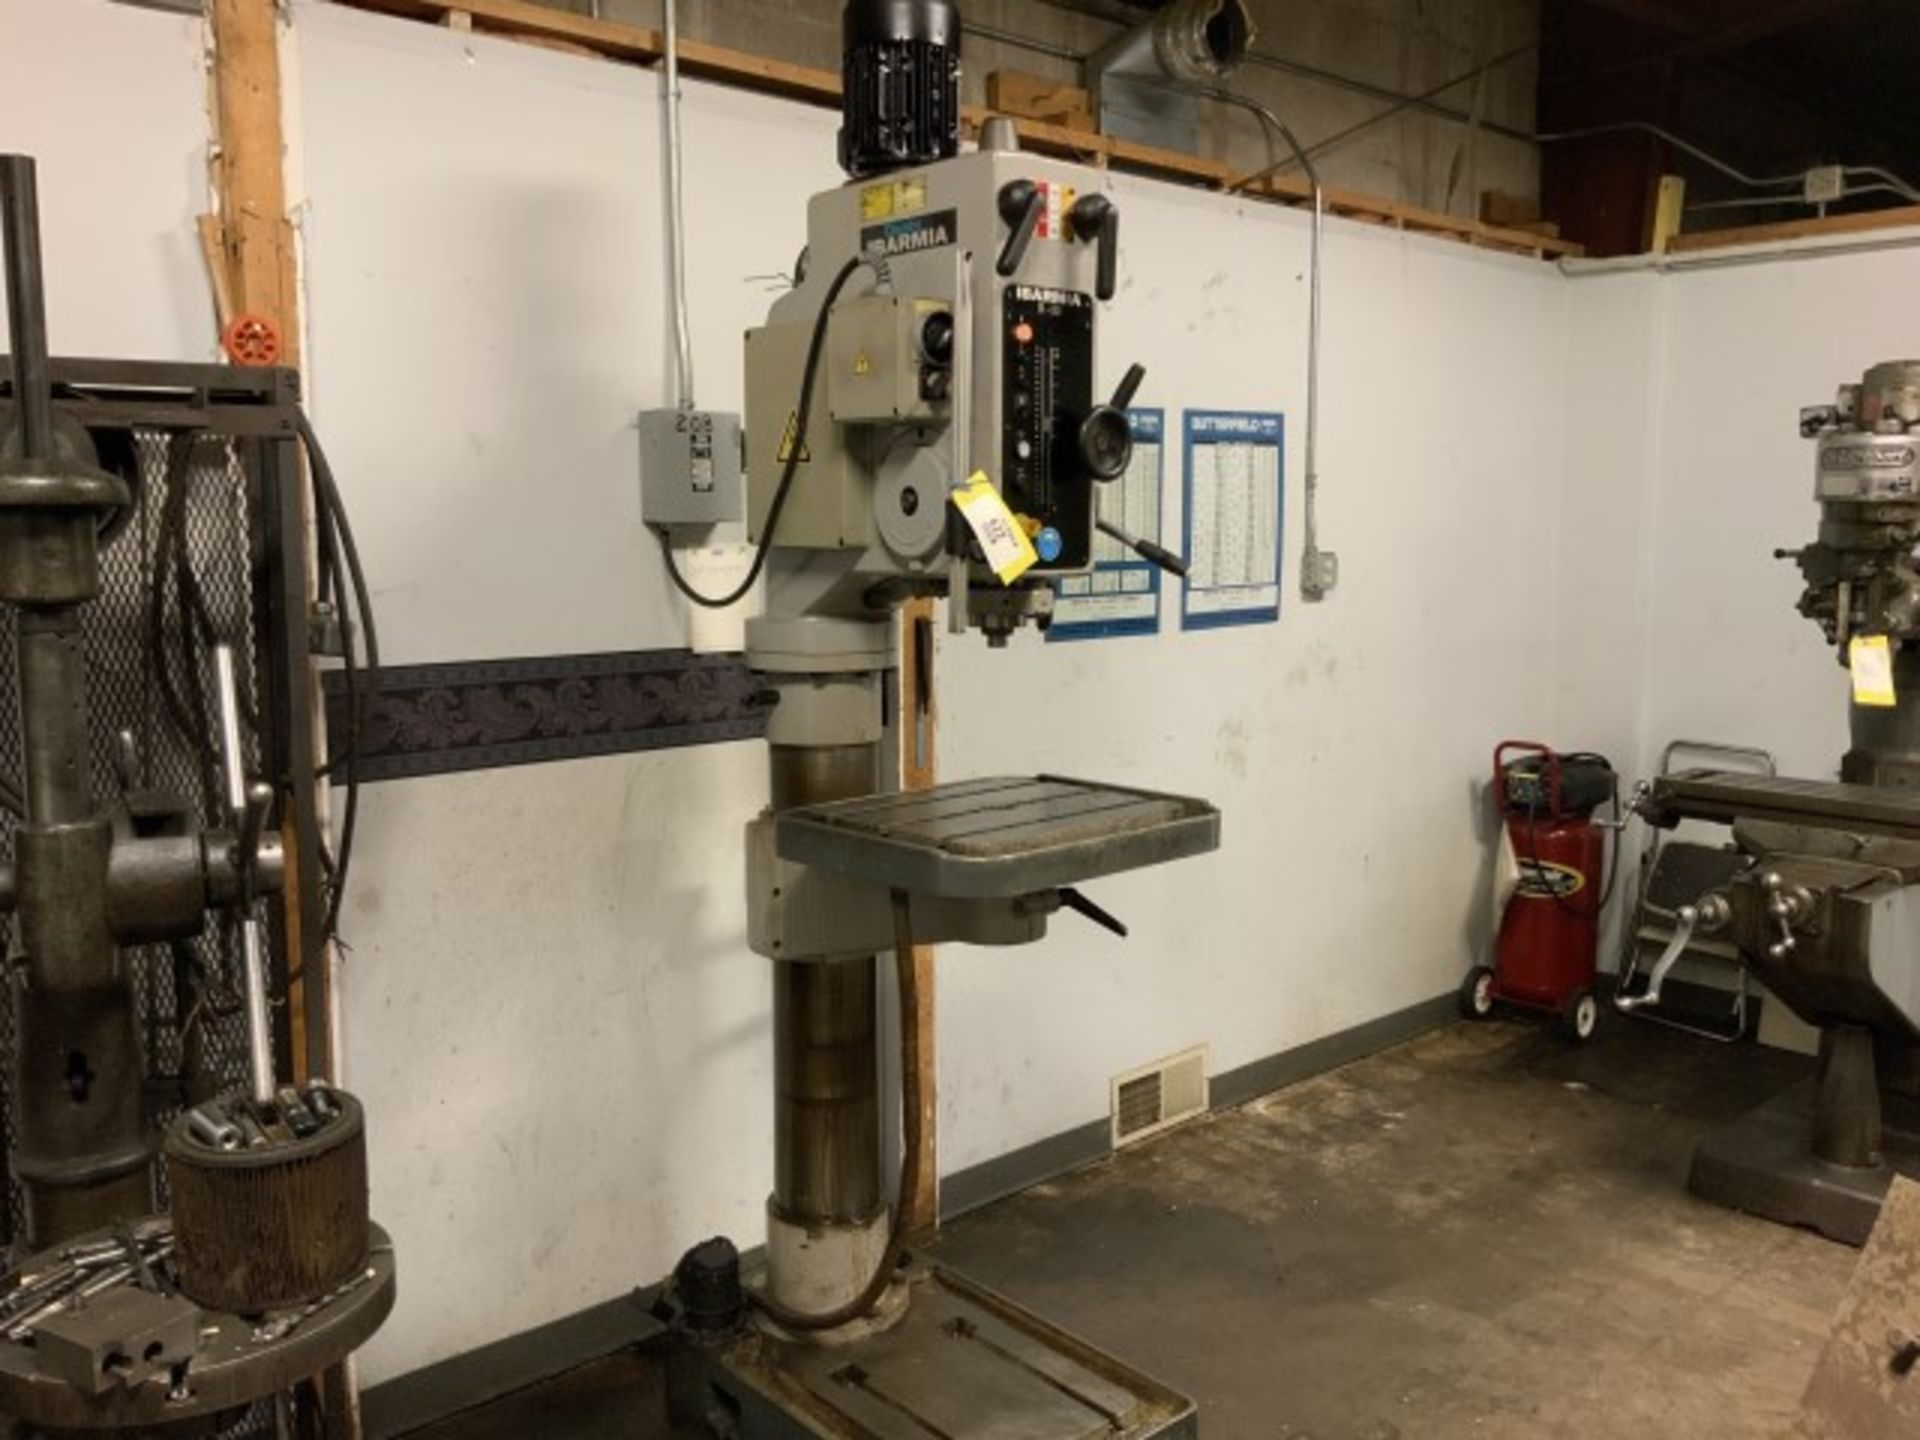 2007 Clausing/Ibarmia Geared Head Drill Press - Image 7 of 7